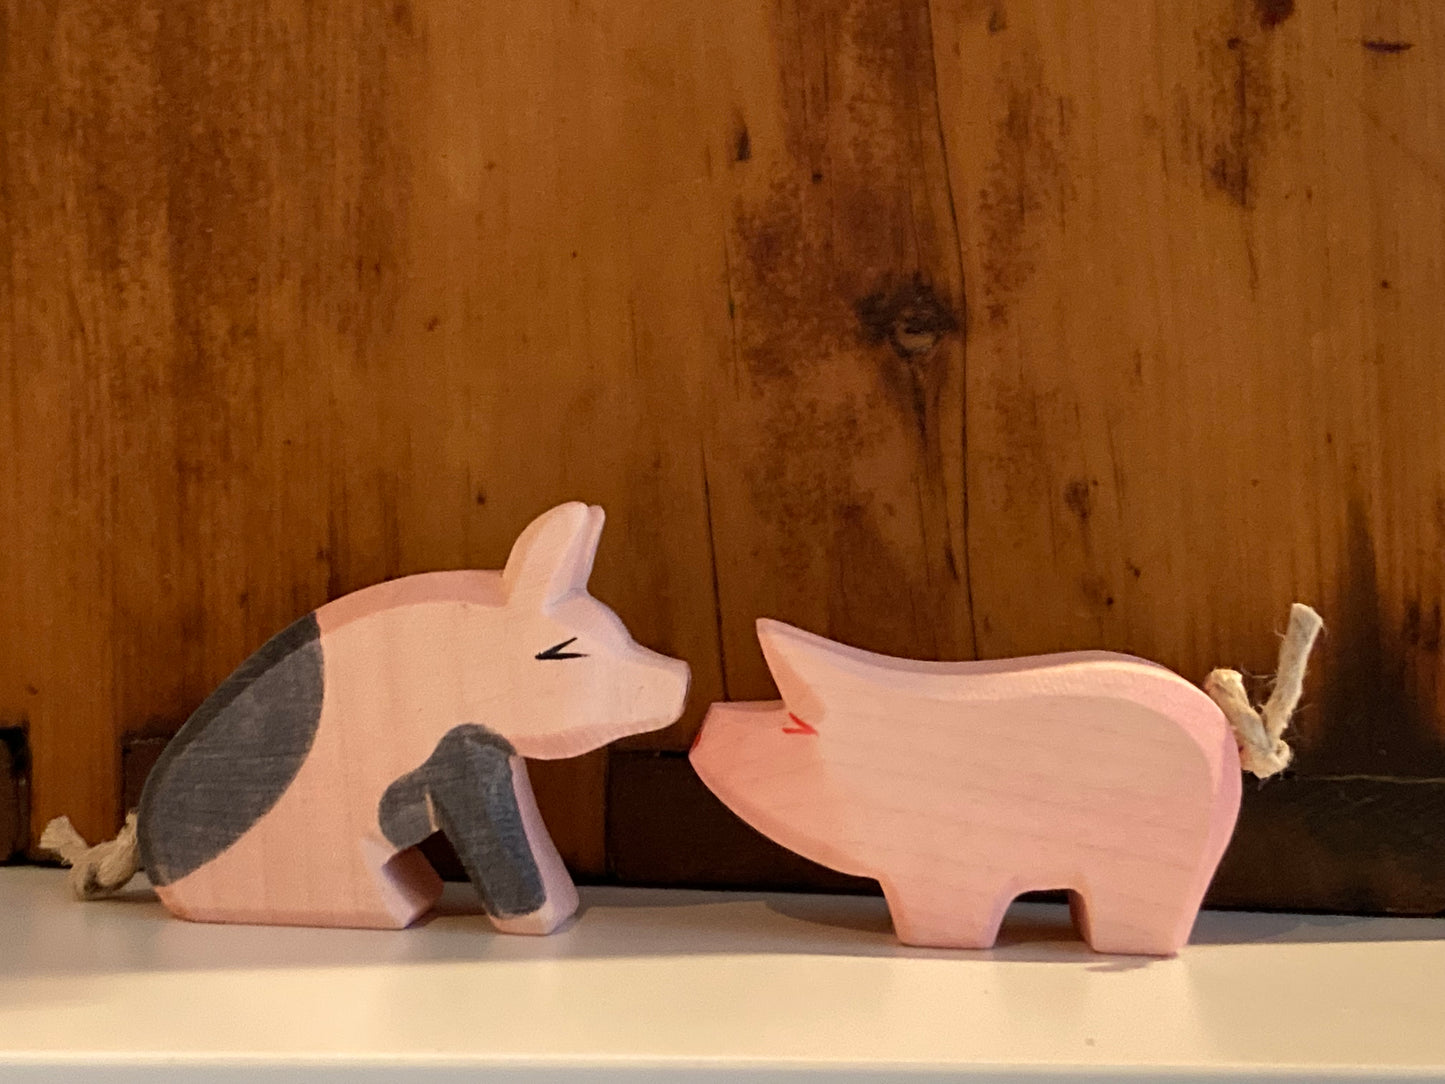 Wooden Dollhouse Play - SPOTTED LITTLE PIGLET